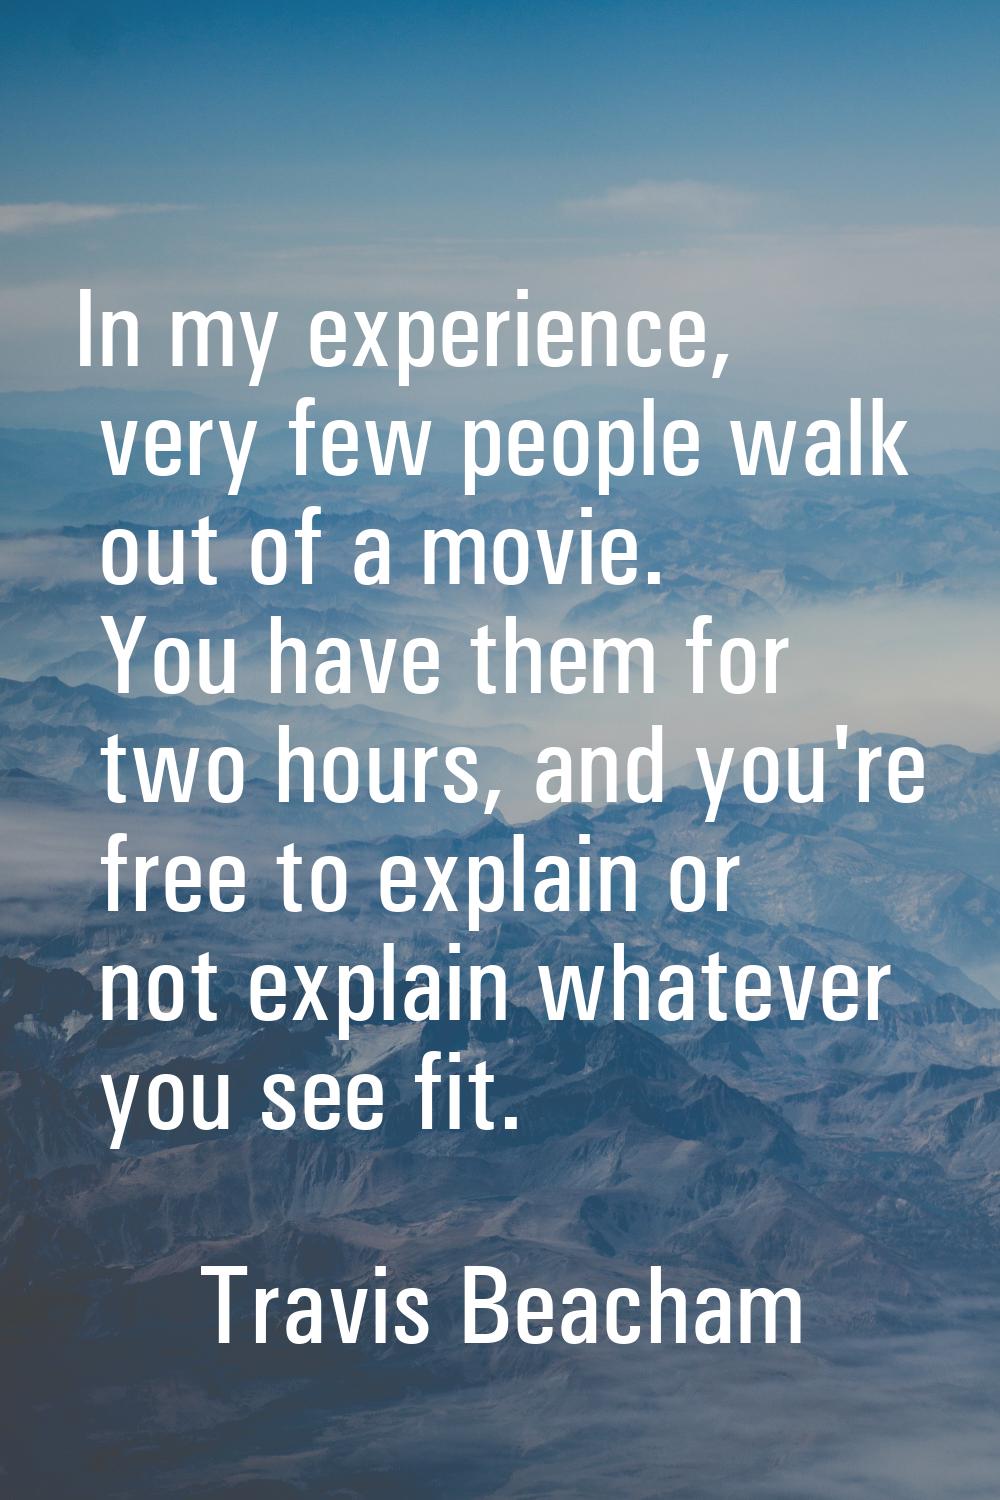 In my experience, very few people walk out of a movie. You have them for two hours, and you're free